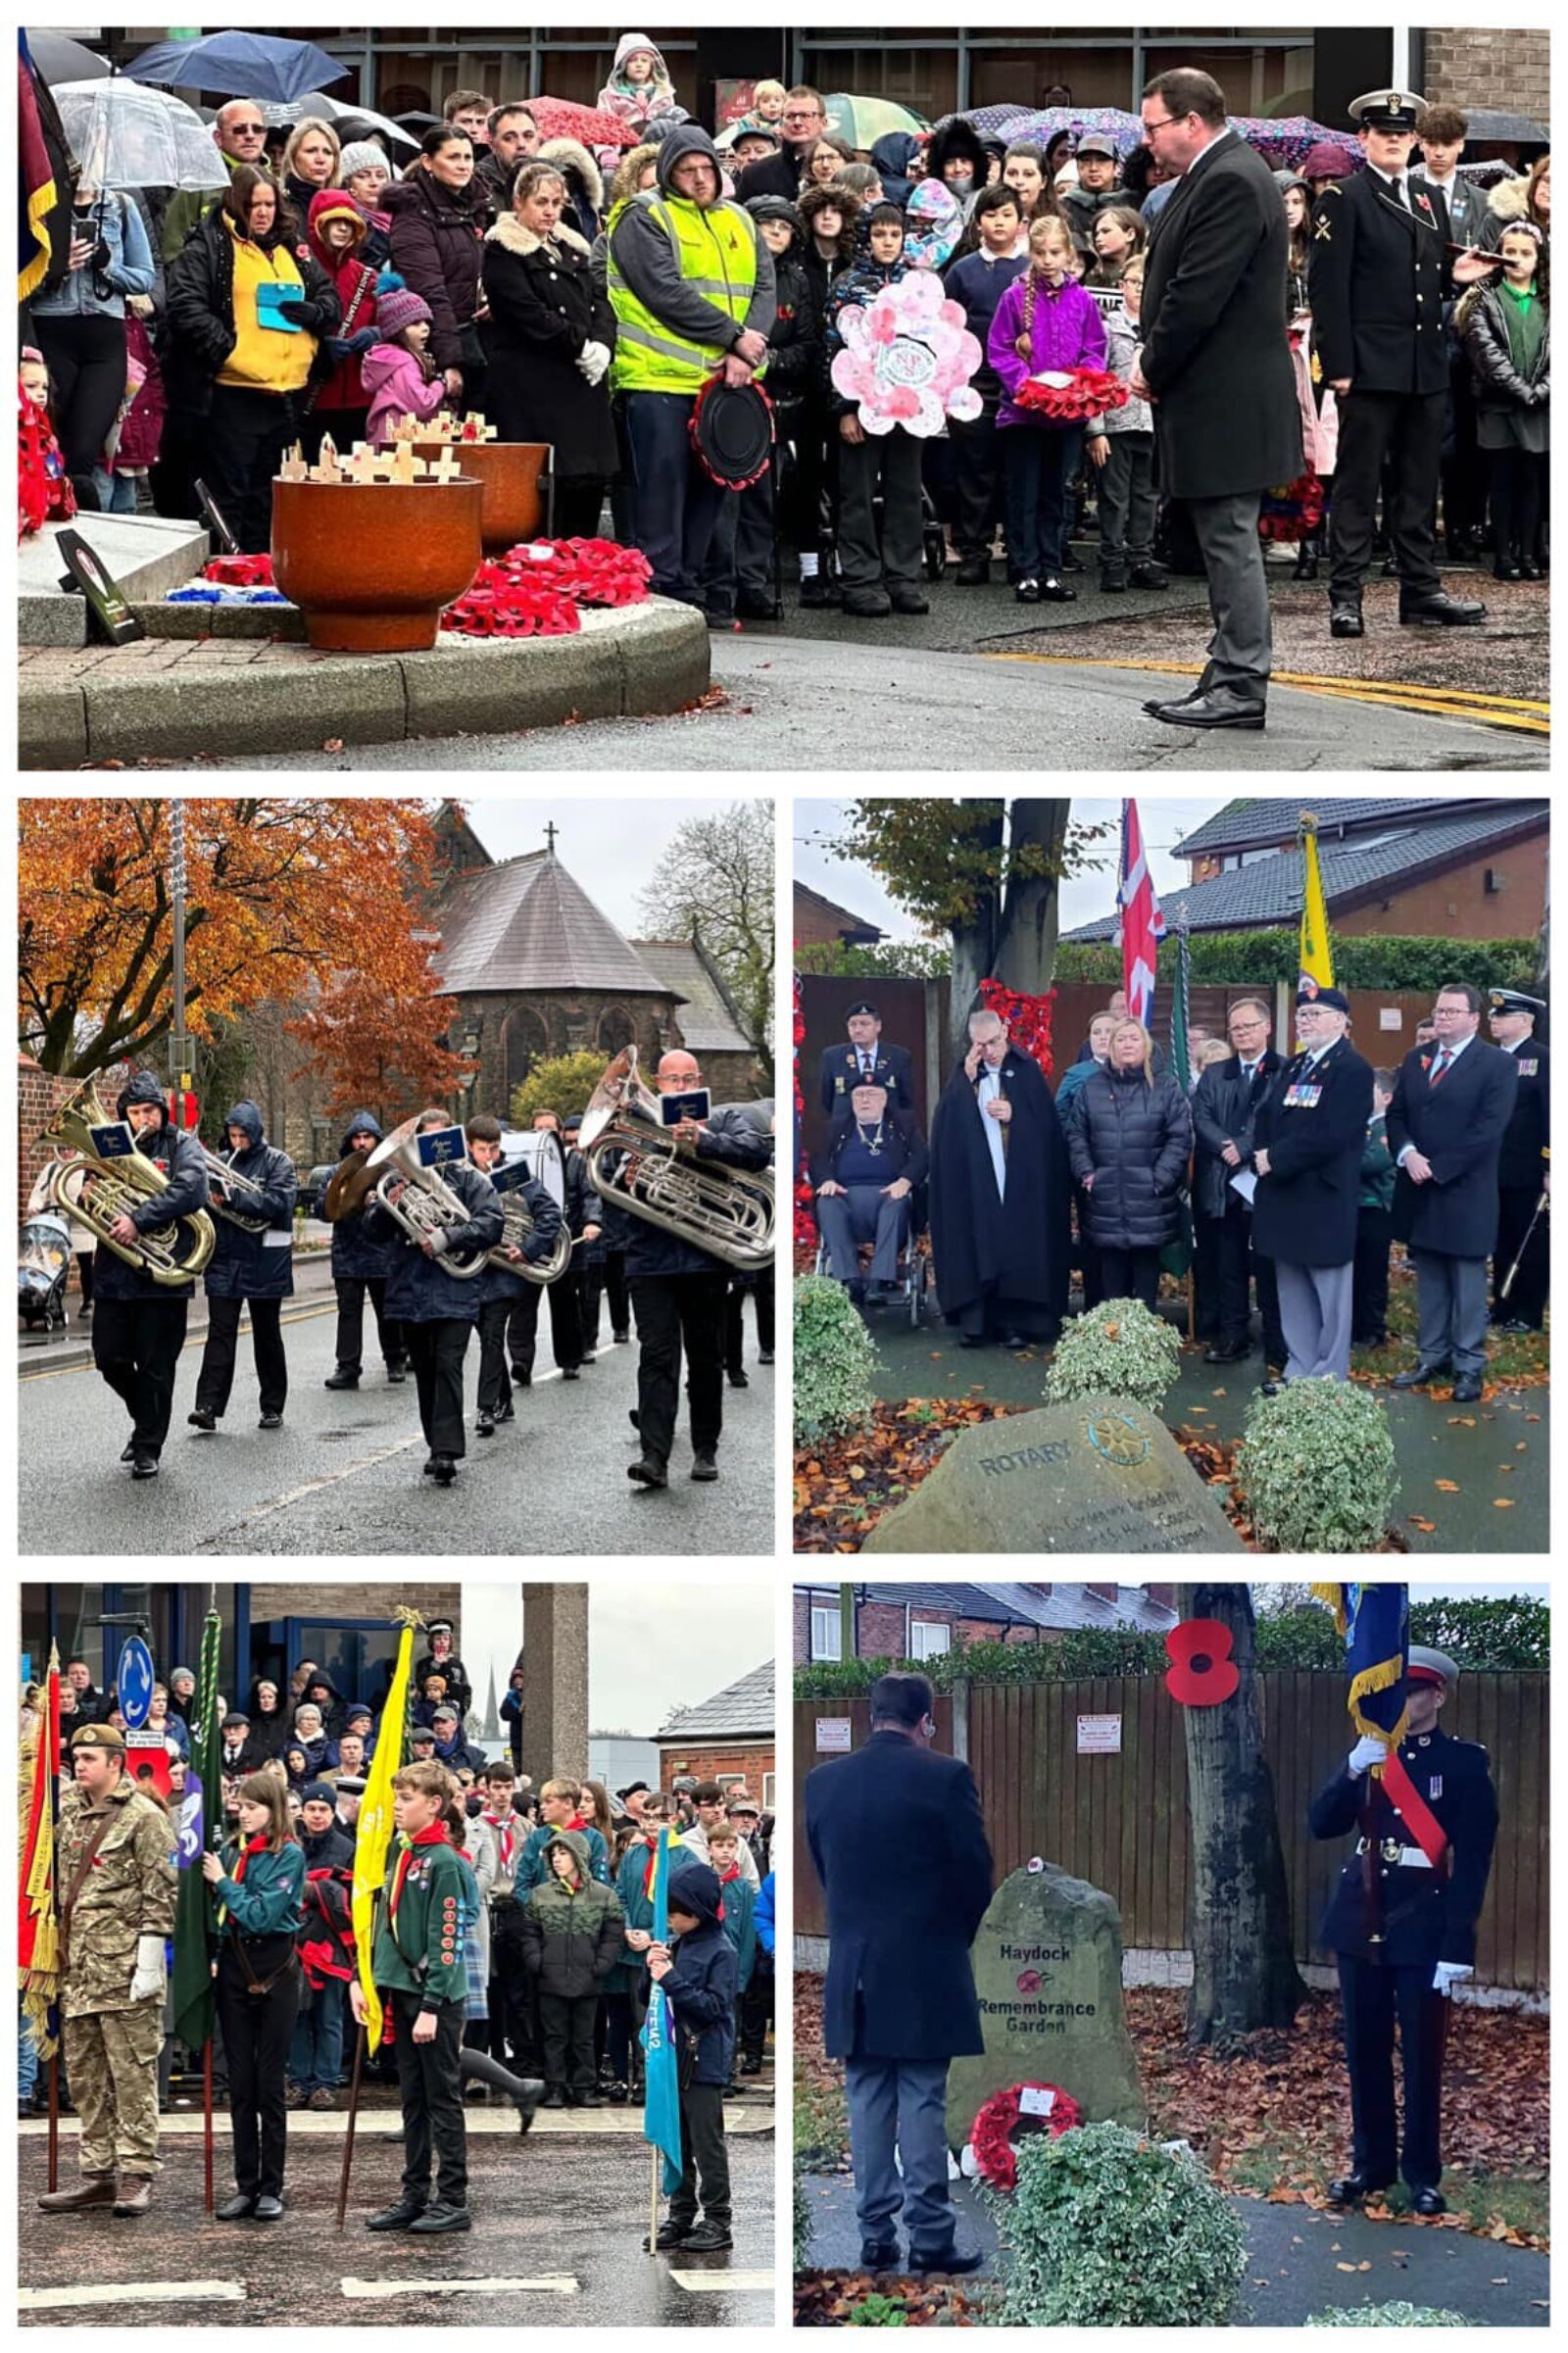 Images shown from events across St Helens on Remembrance Day 